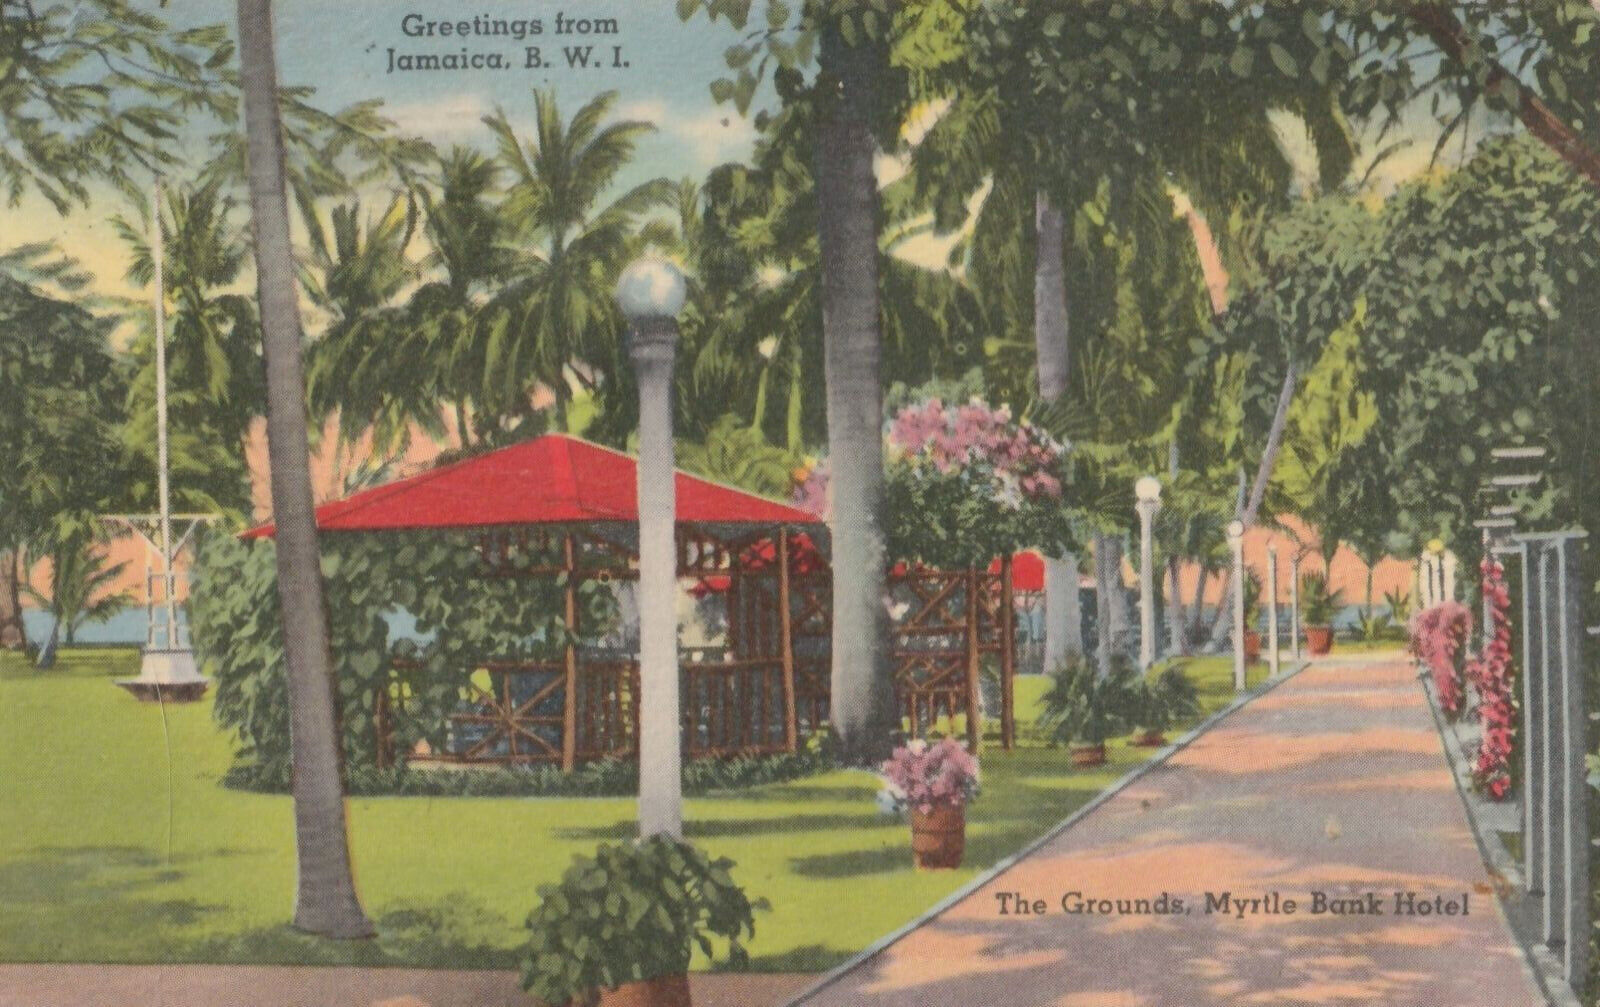 VINTAGE POSTCARD THE GROUNDS AT THE MYRTLE BANK HOTEL KINGSTON JAMAICA 1954